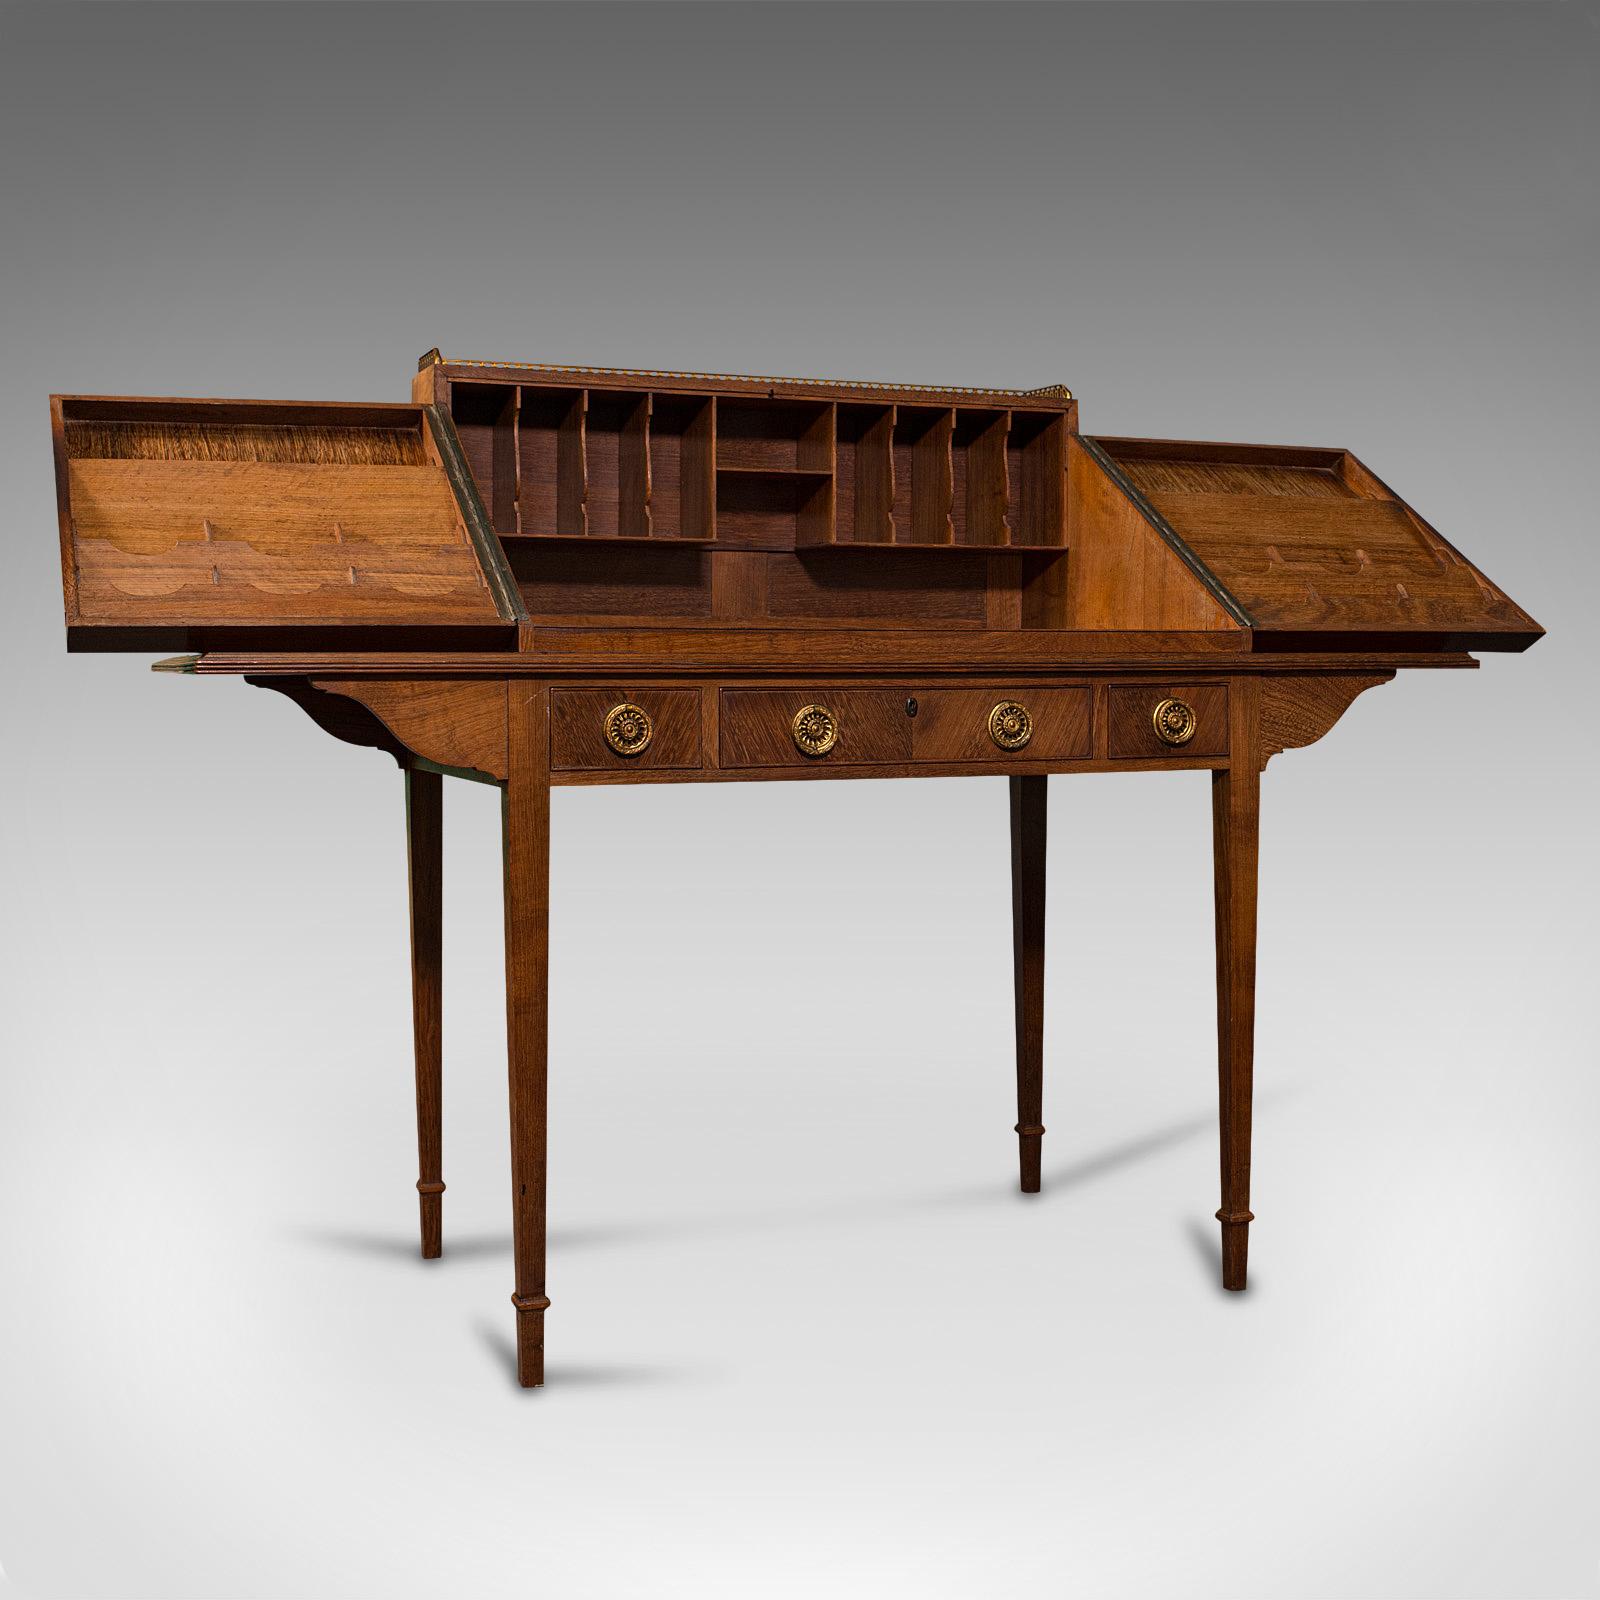 This is a vintage correspondence desk. An English, solid teak library or writing table in the manner of the Cotswold School, dating to the mid 20th century, circa 1950.

Strikingly figured desk of generous proportion and superb